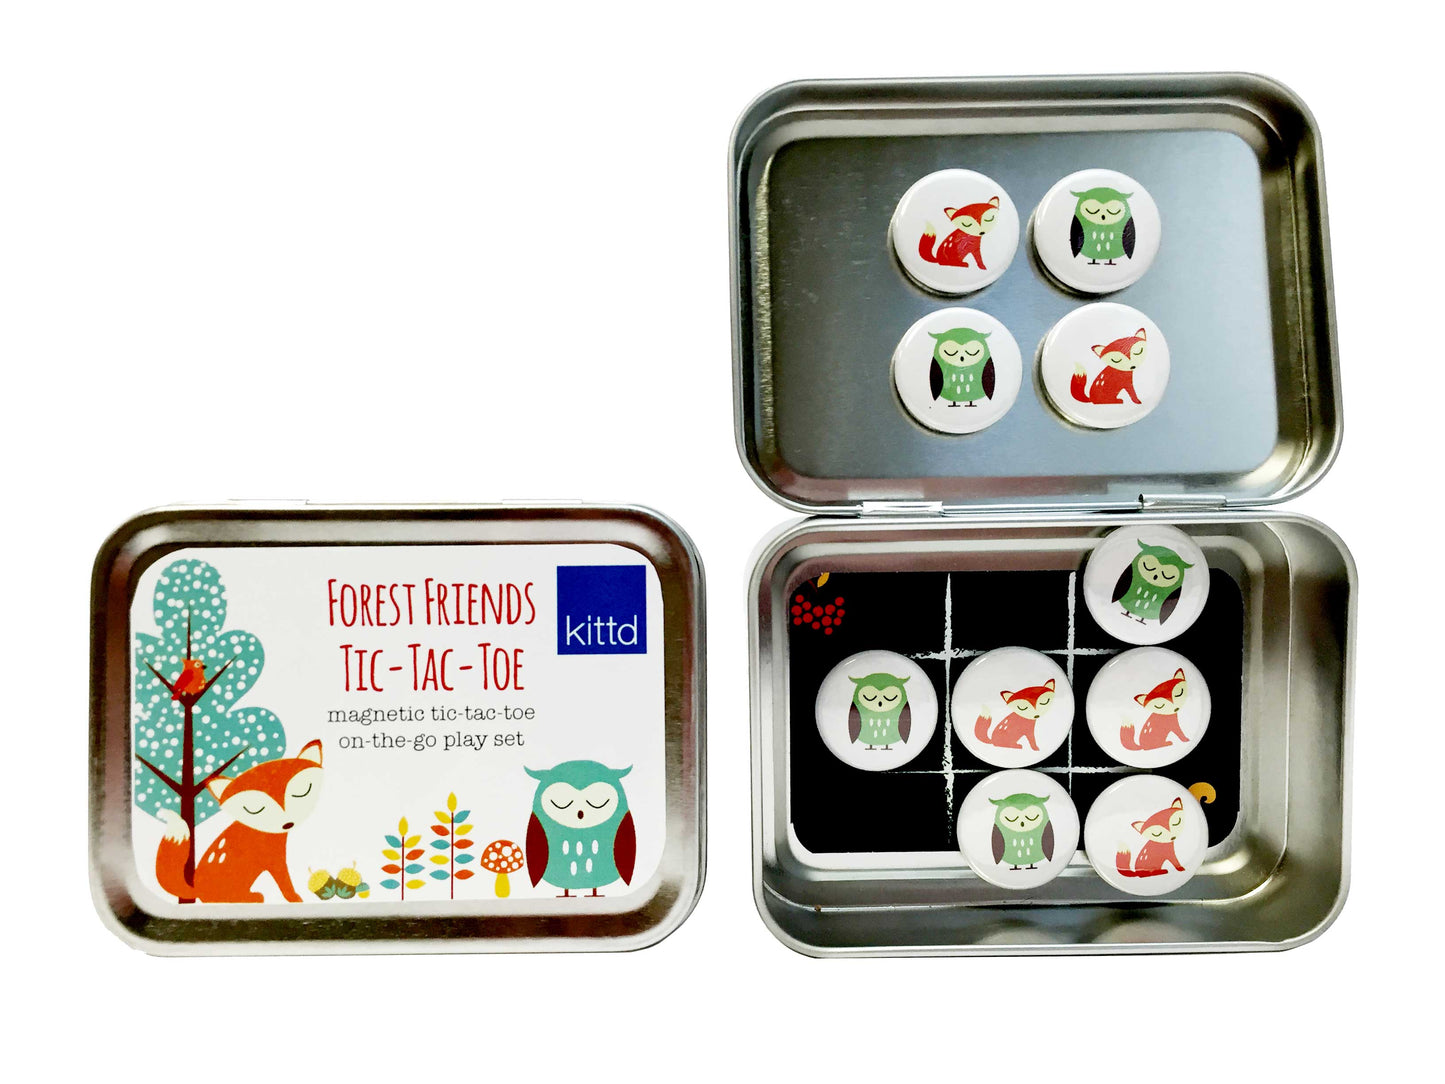 Forest Friends Tic-Tac-Toe On-the-Go Kids Travel Game